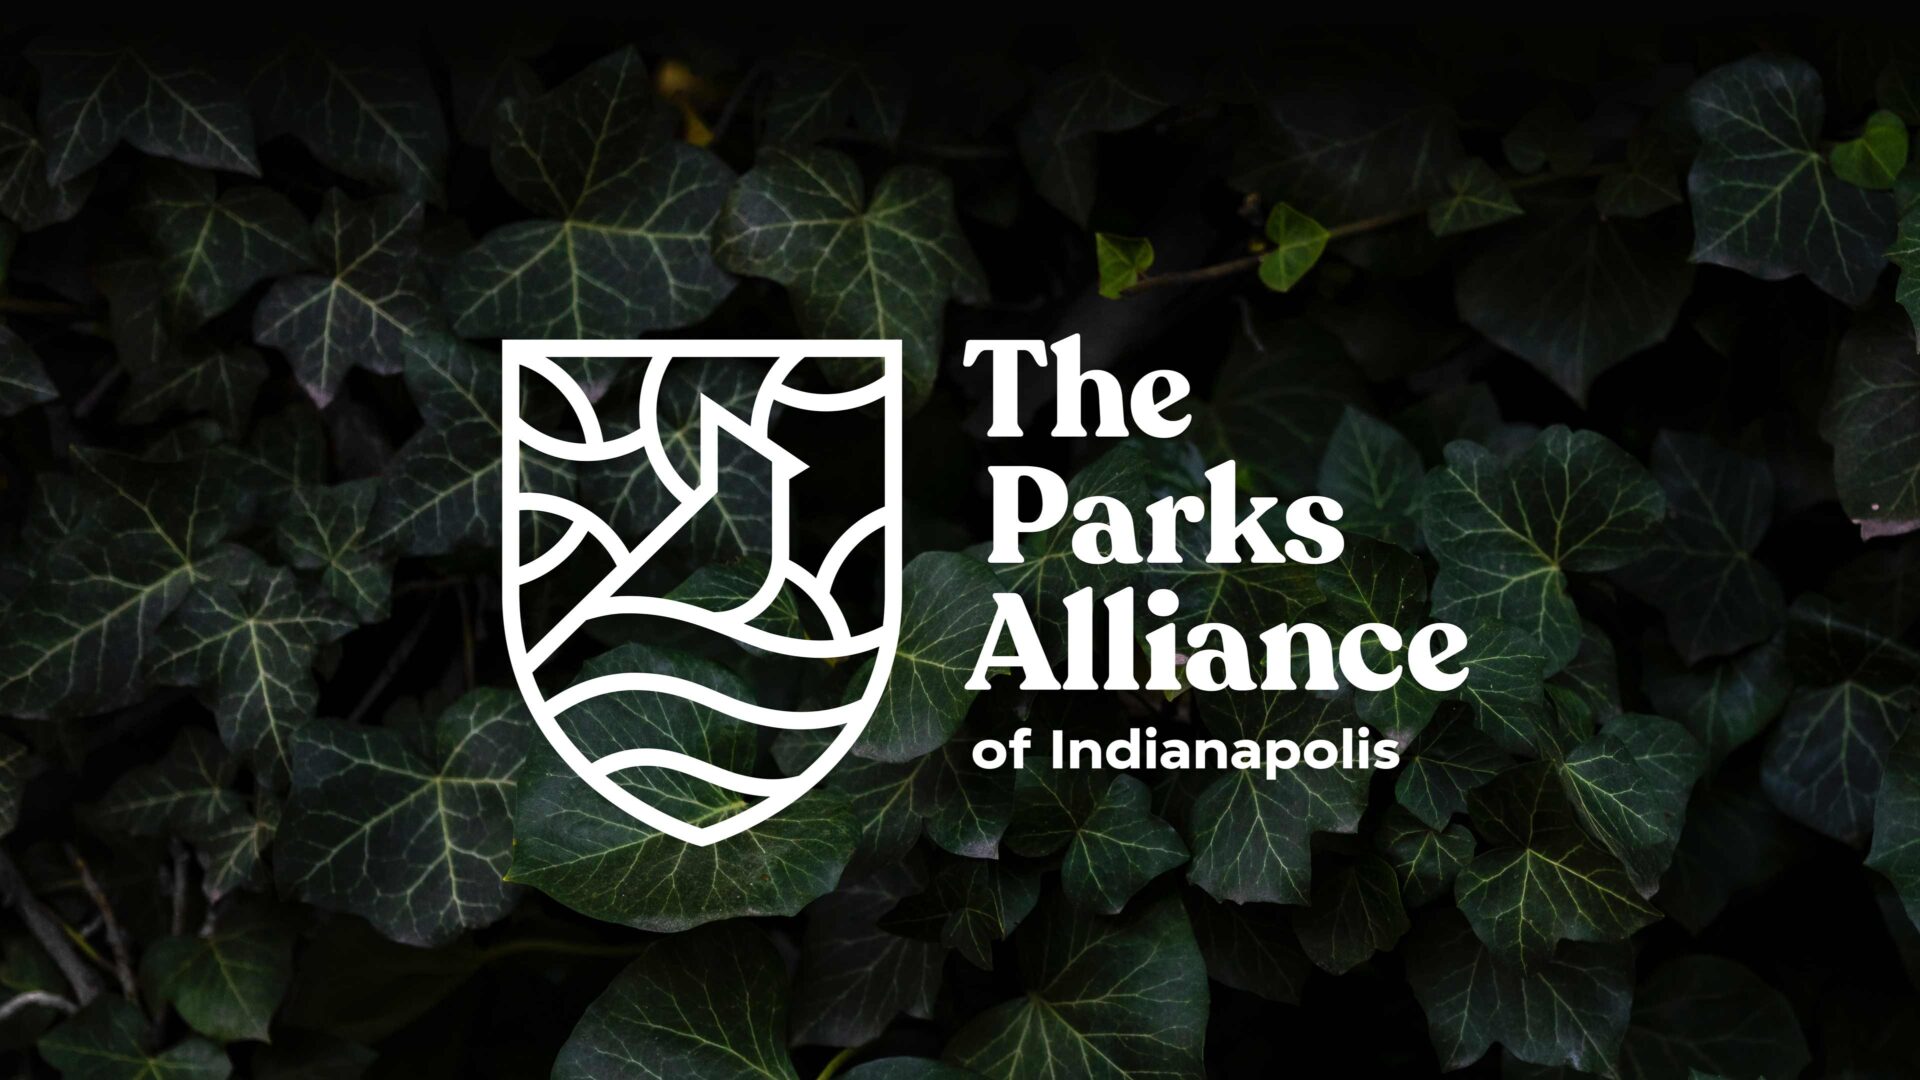 The Parks Alliance of Indianapolis